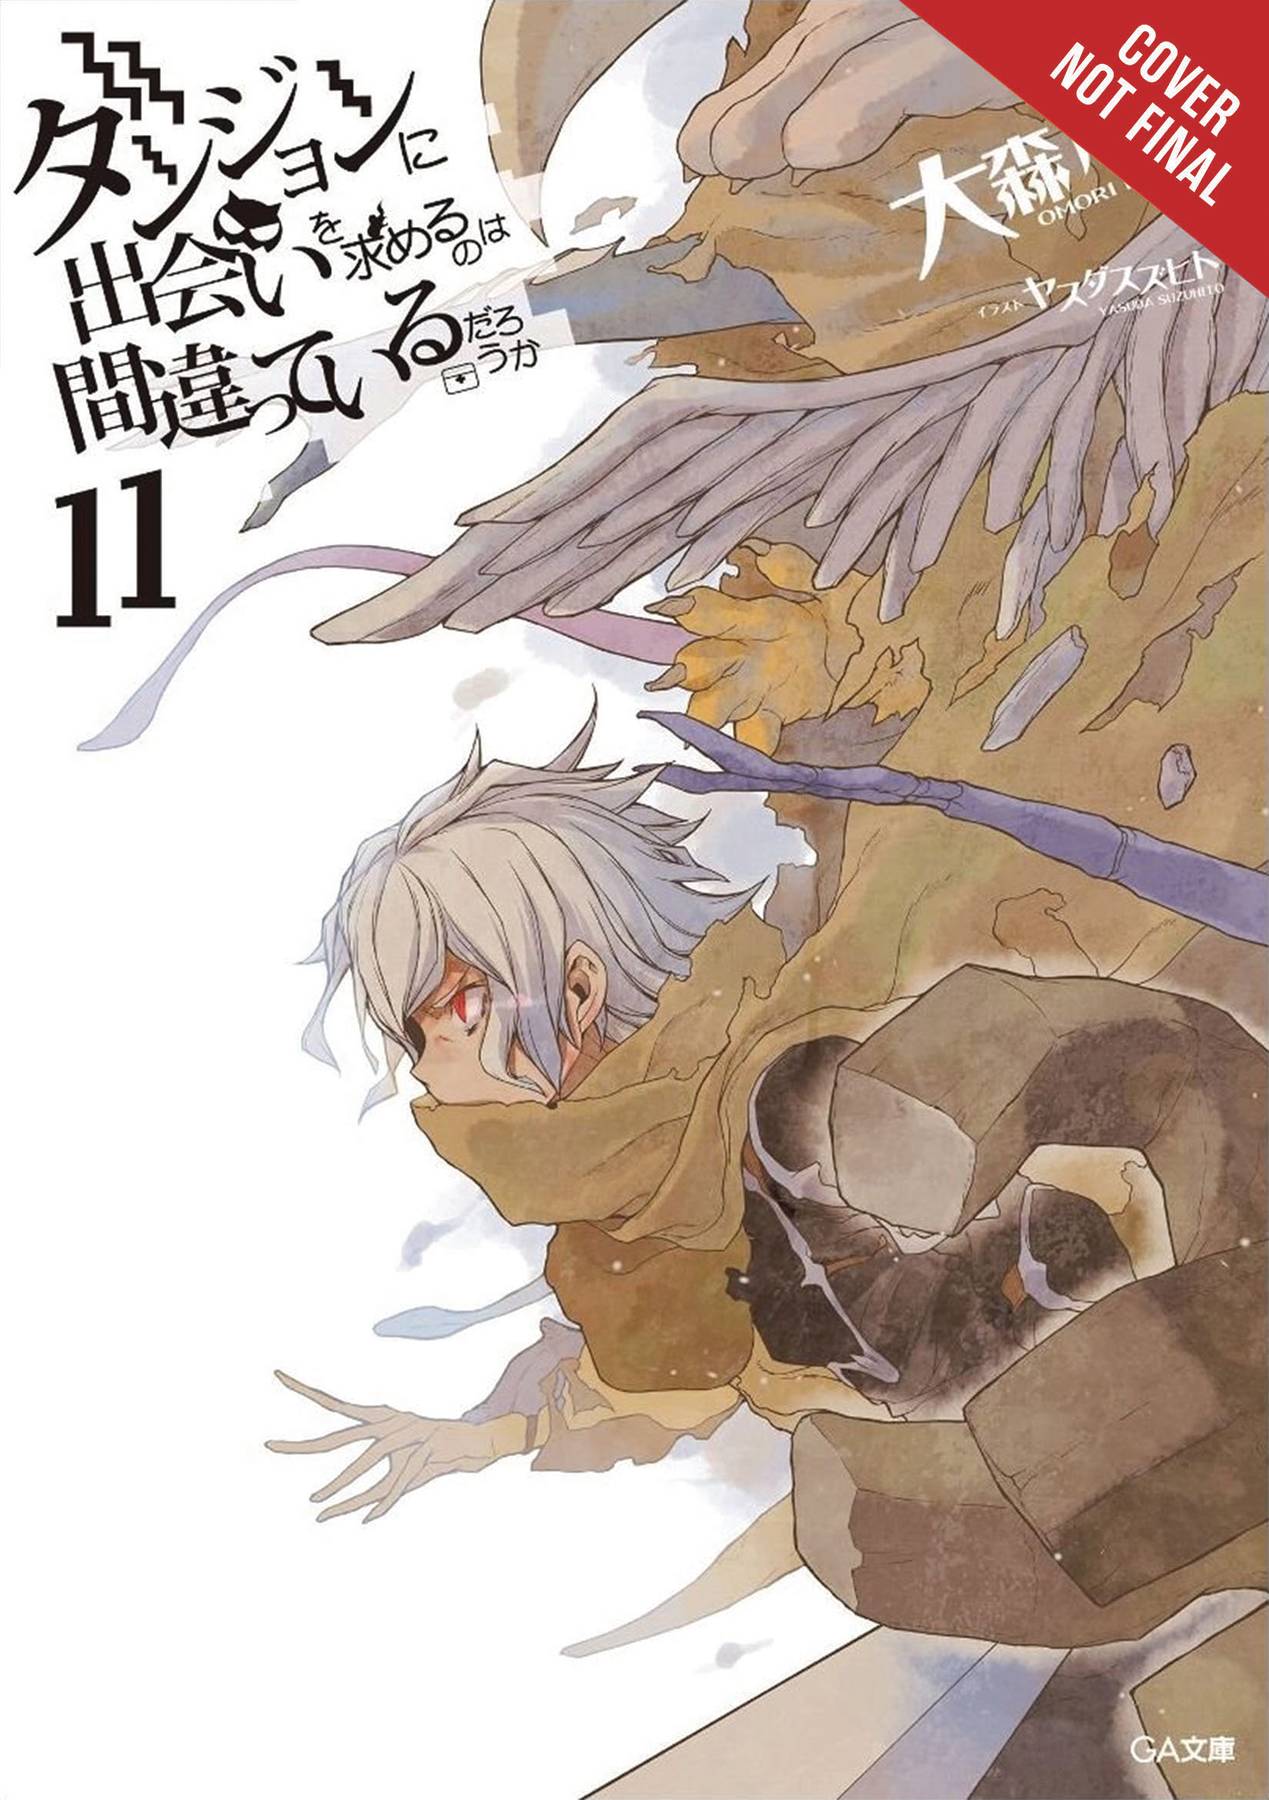 IS WRONG PICK UP GIRLS DUNGEON NOVEL SC VOL 11